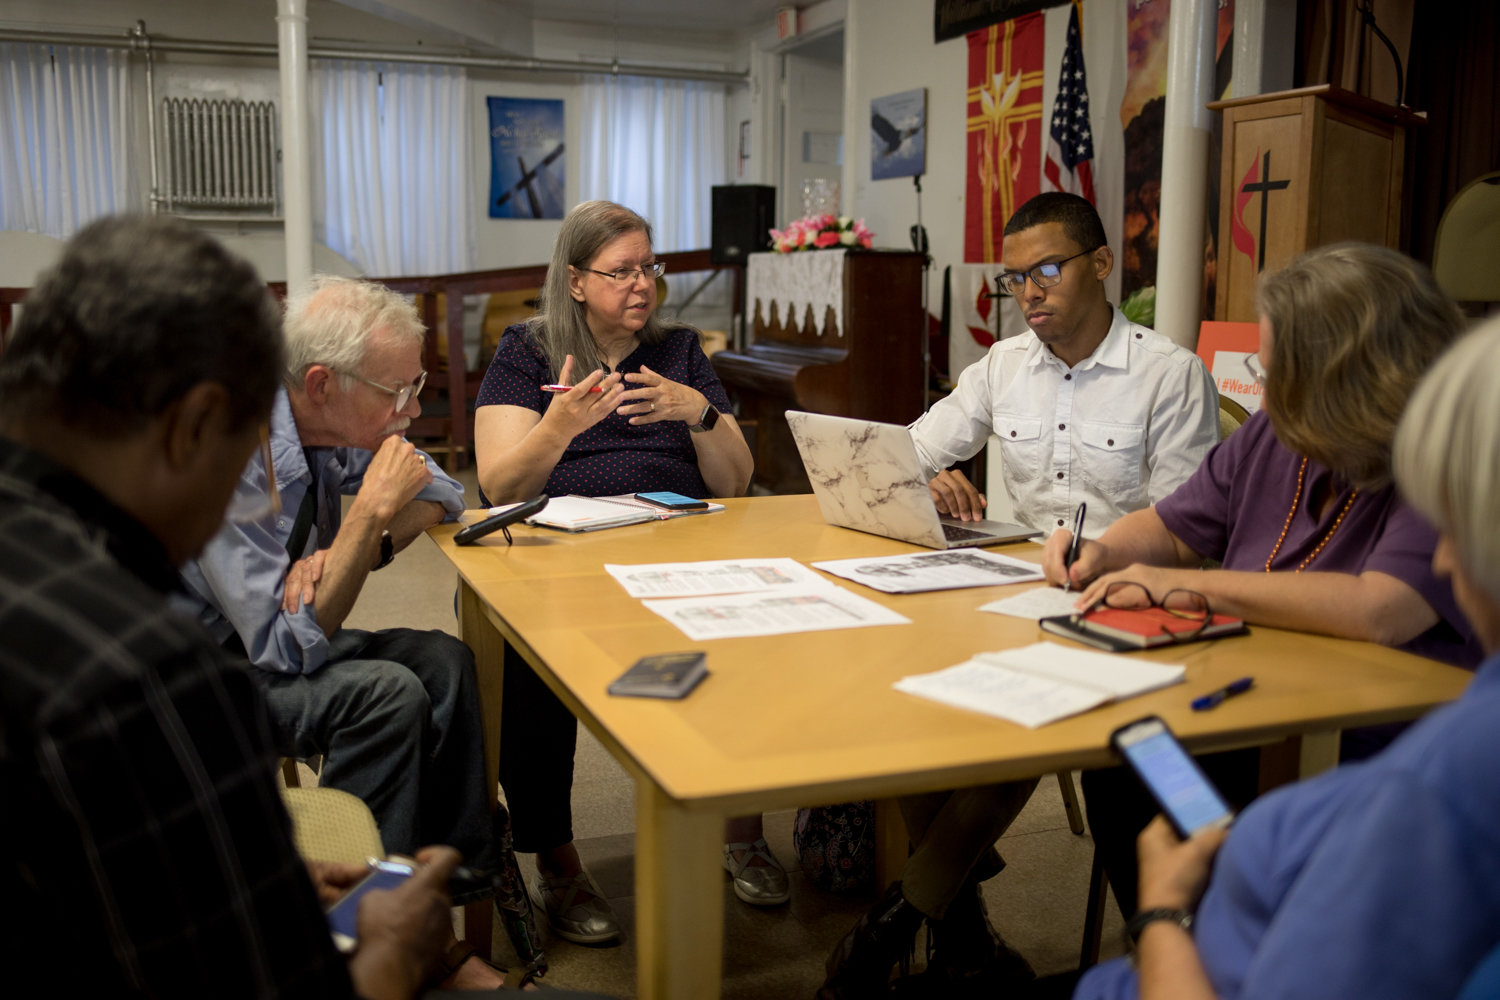 Jone Johnson Lewis, leader of the Riverdale-Yonkers Society for Ethical Culture, center, is adapting to taking the organization’s services and activities online as the coronavirus pandemic has caused many people to stay at home.